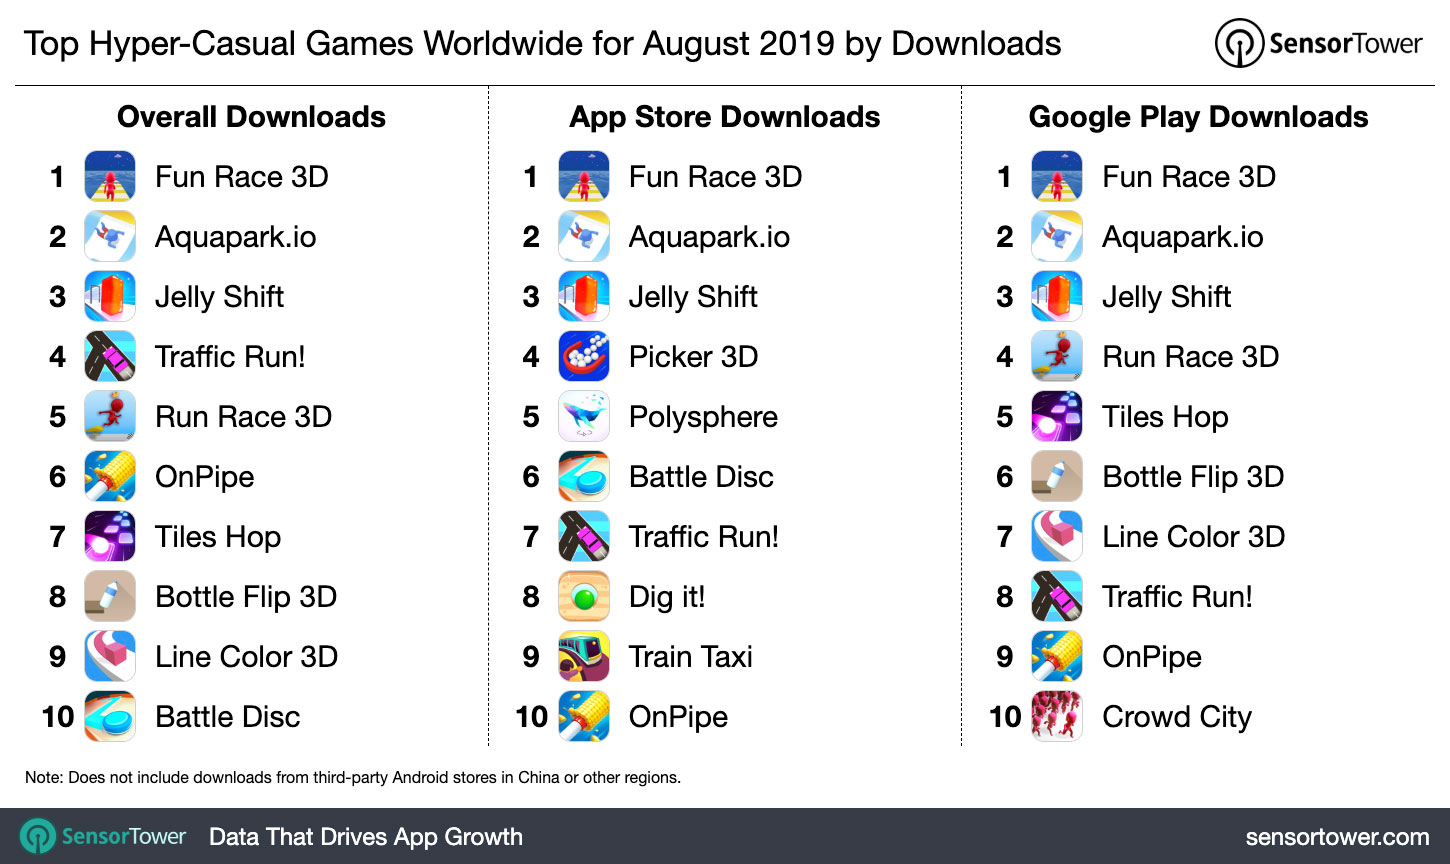 Top Hyper-Casual Games Worldwide for August 2019 by Downloads